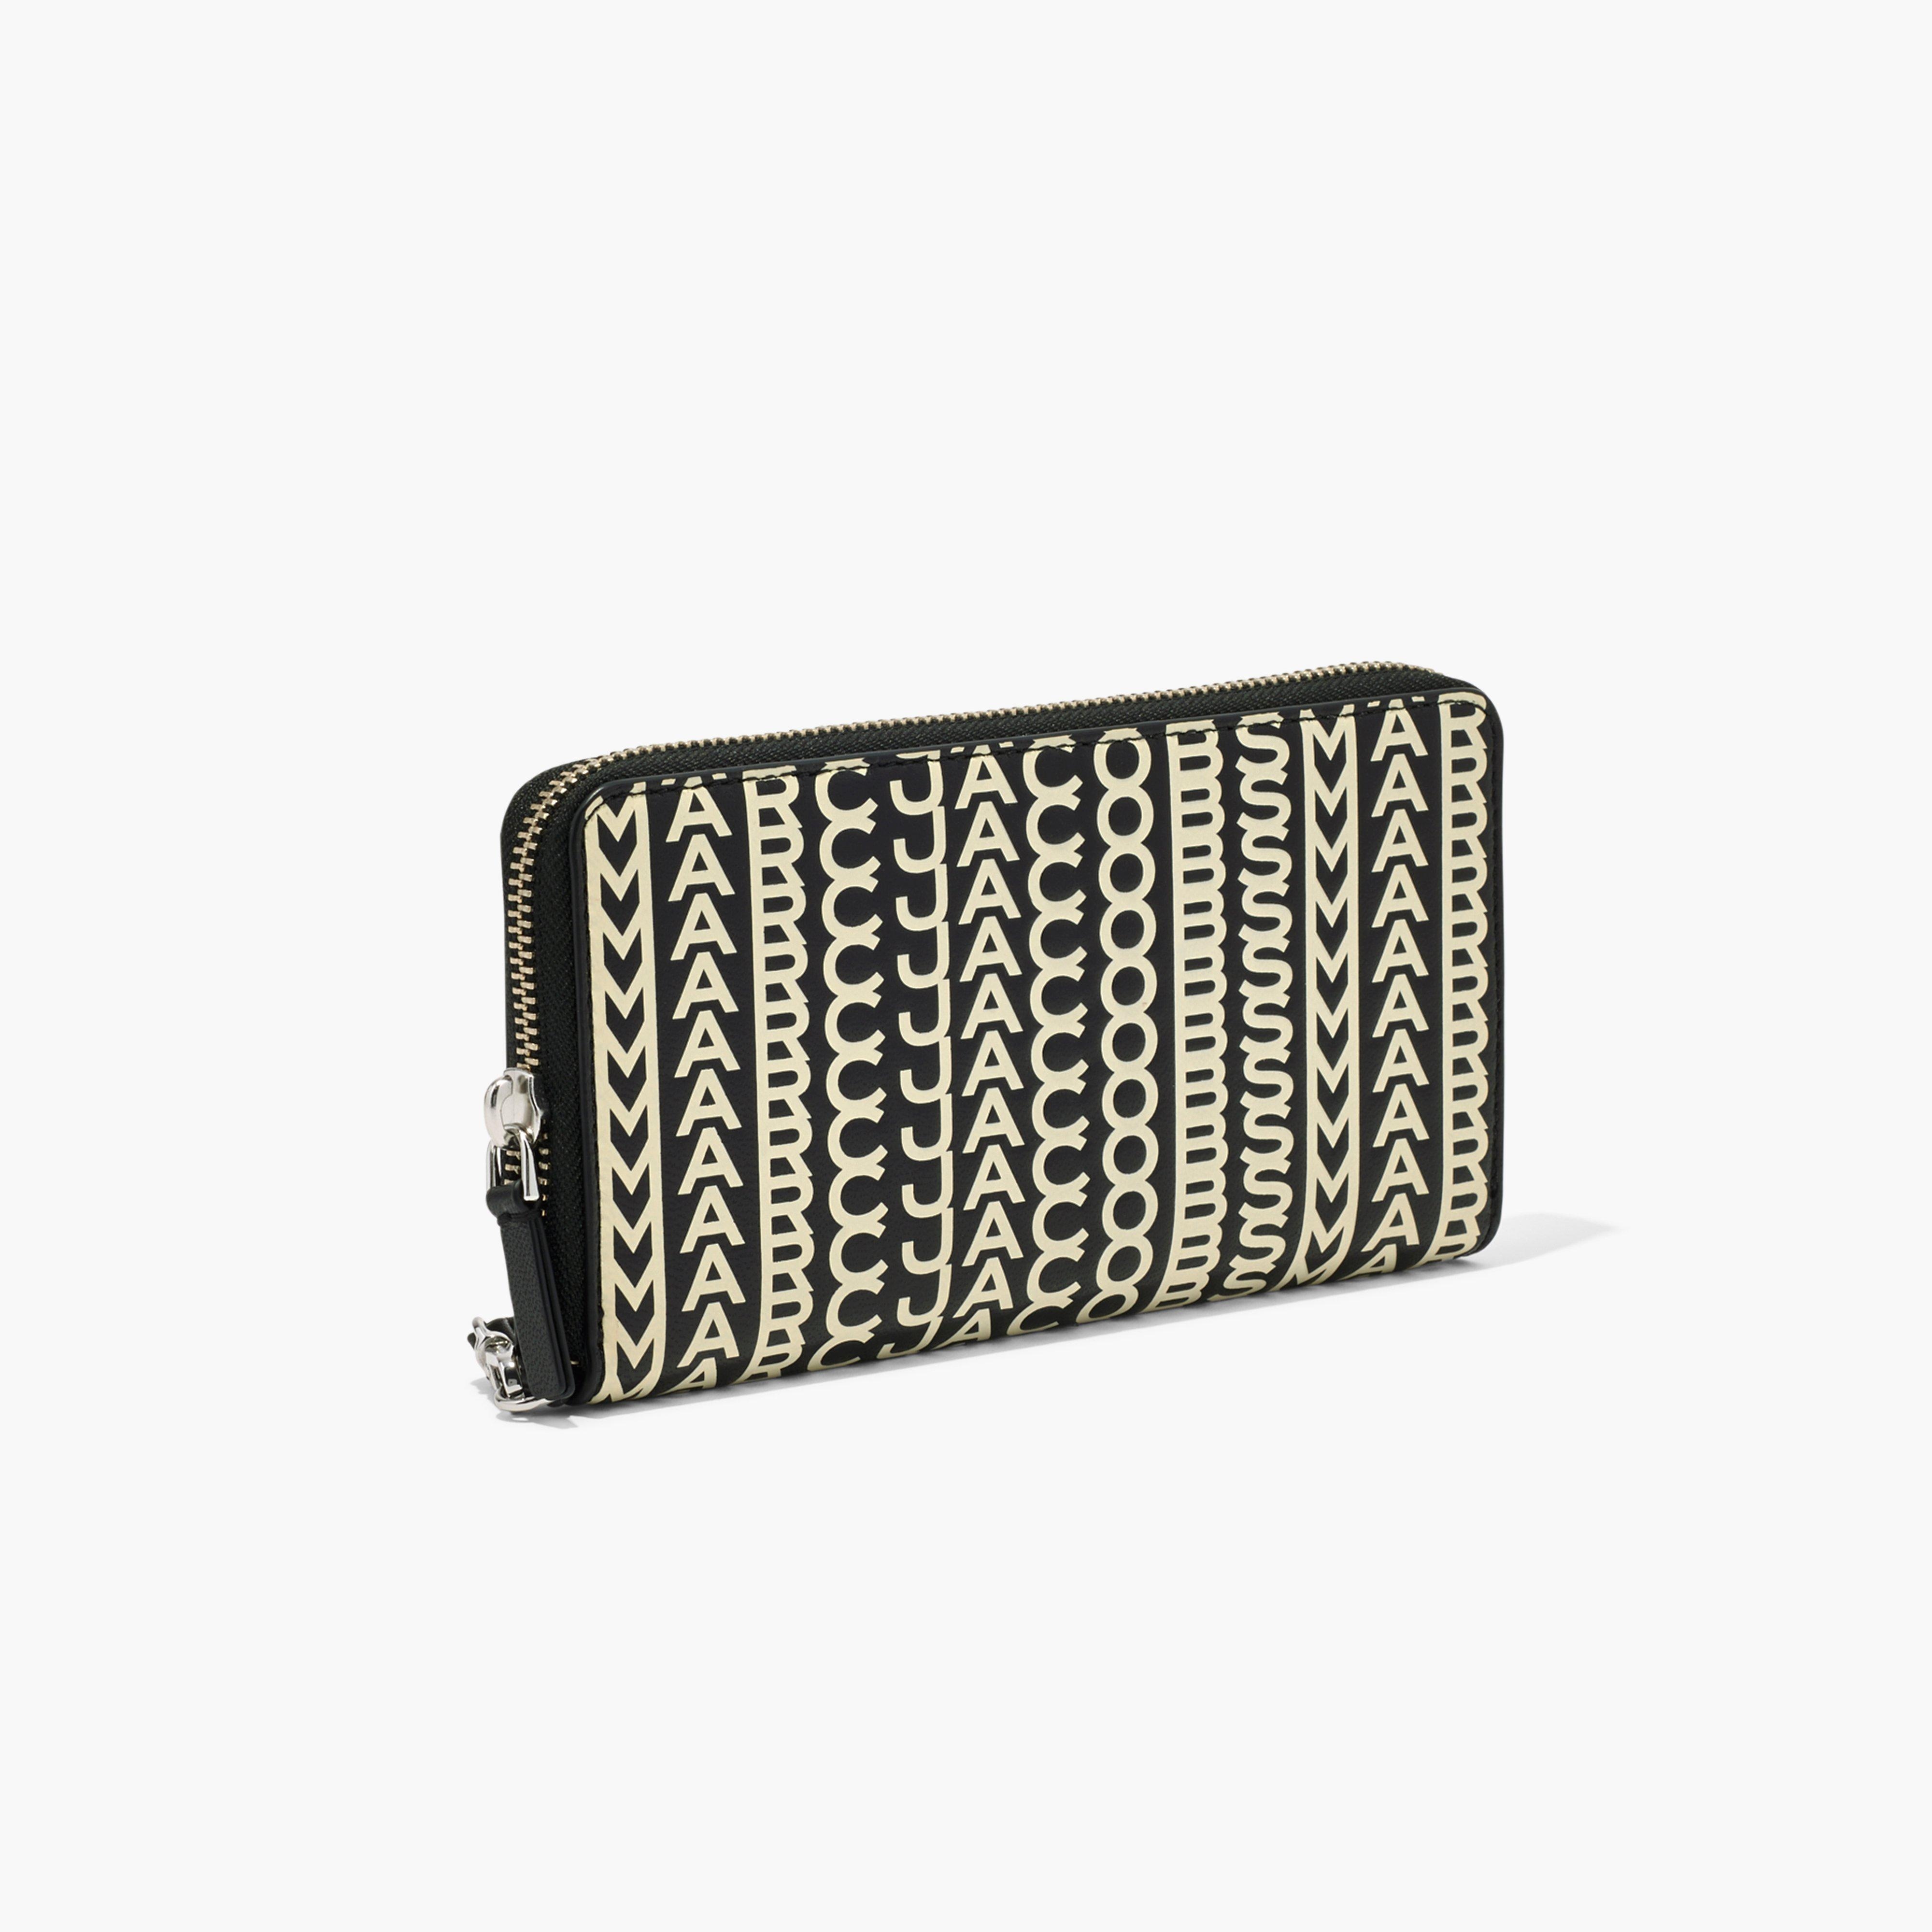 THE MONOGRAM LEATHER CONTINENTAL WRISTLET WALLET - 3